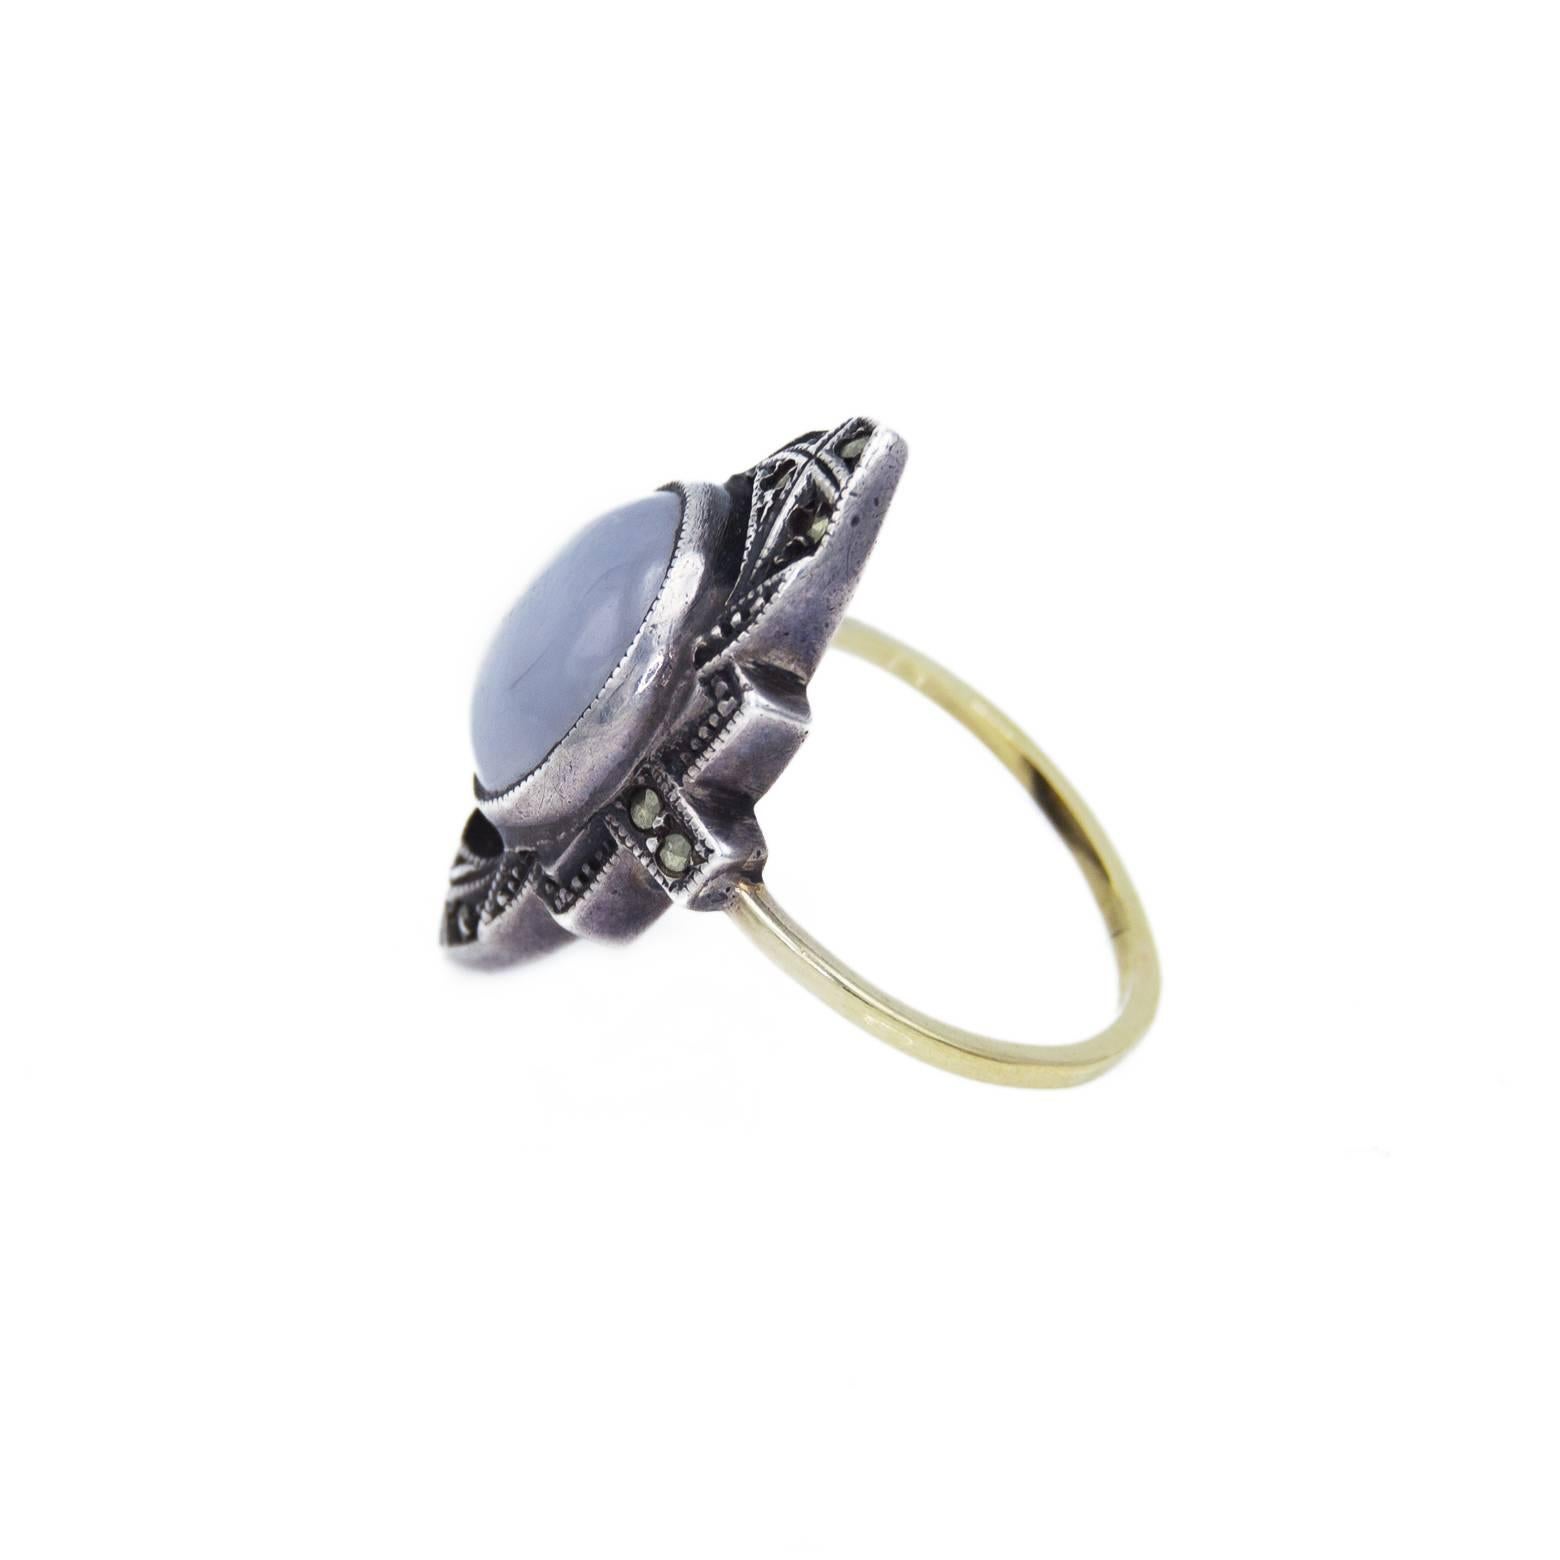 This stunning Art Deco ring is a 'sparkler' with the beautiful star sapphire surrounded by marcasite. The detail is geometric in design and compliments the round sapphire. The ring is a 5 1/4.